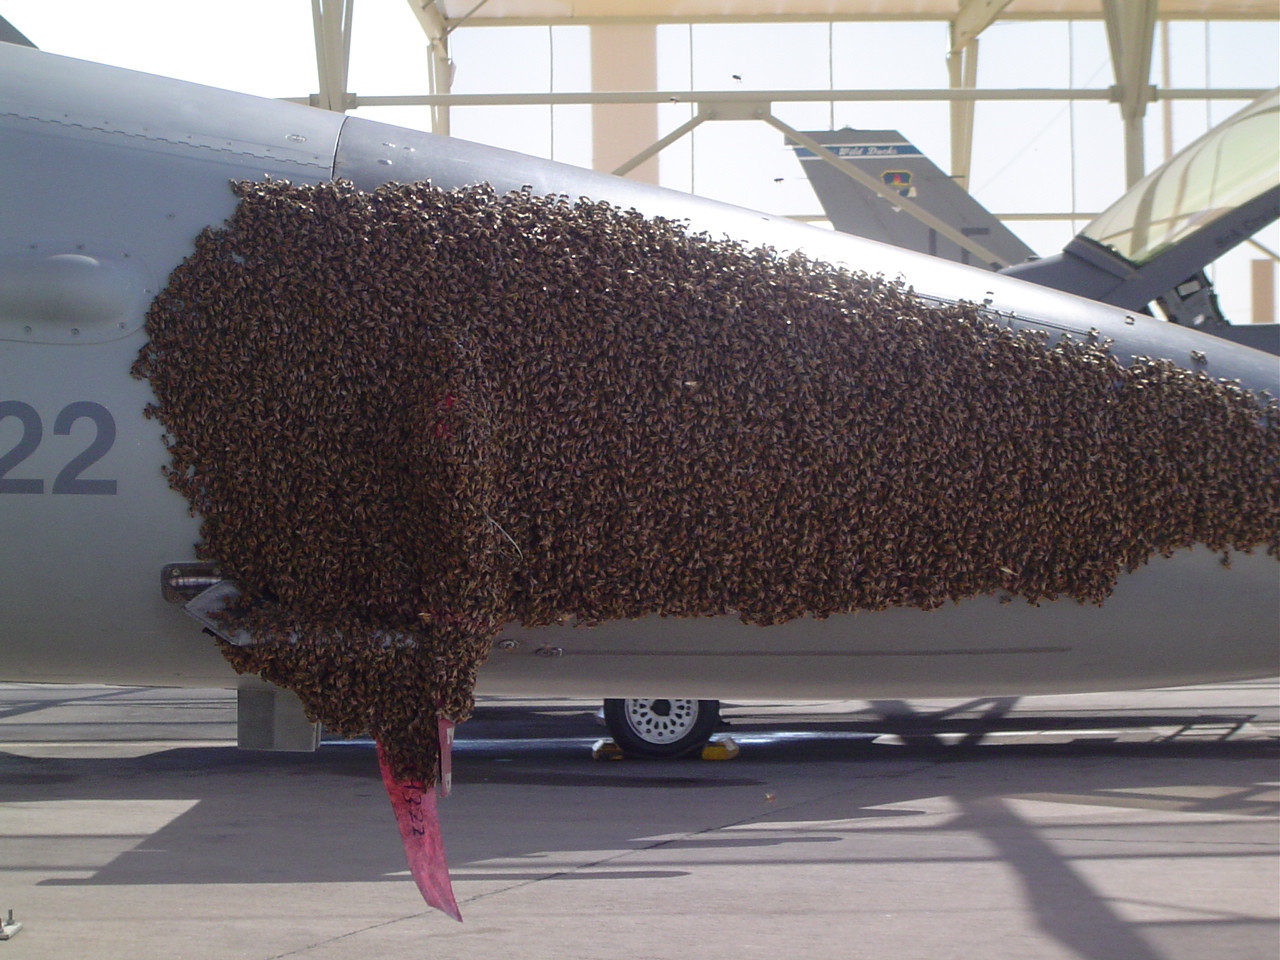 A bee swarm on a F-16 fighter aircraft